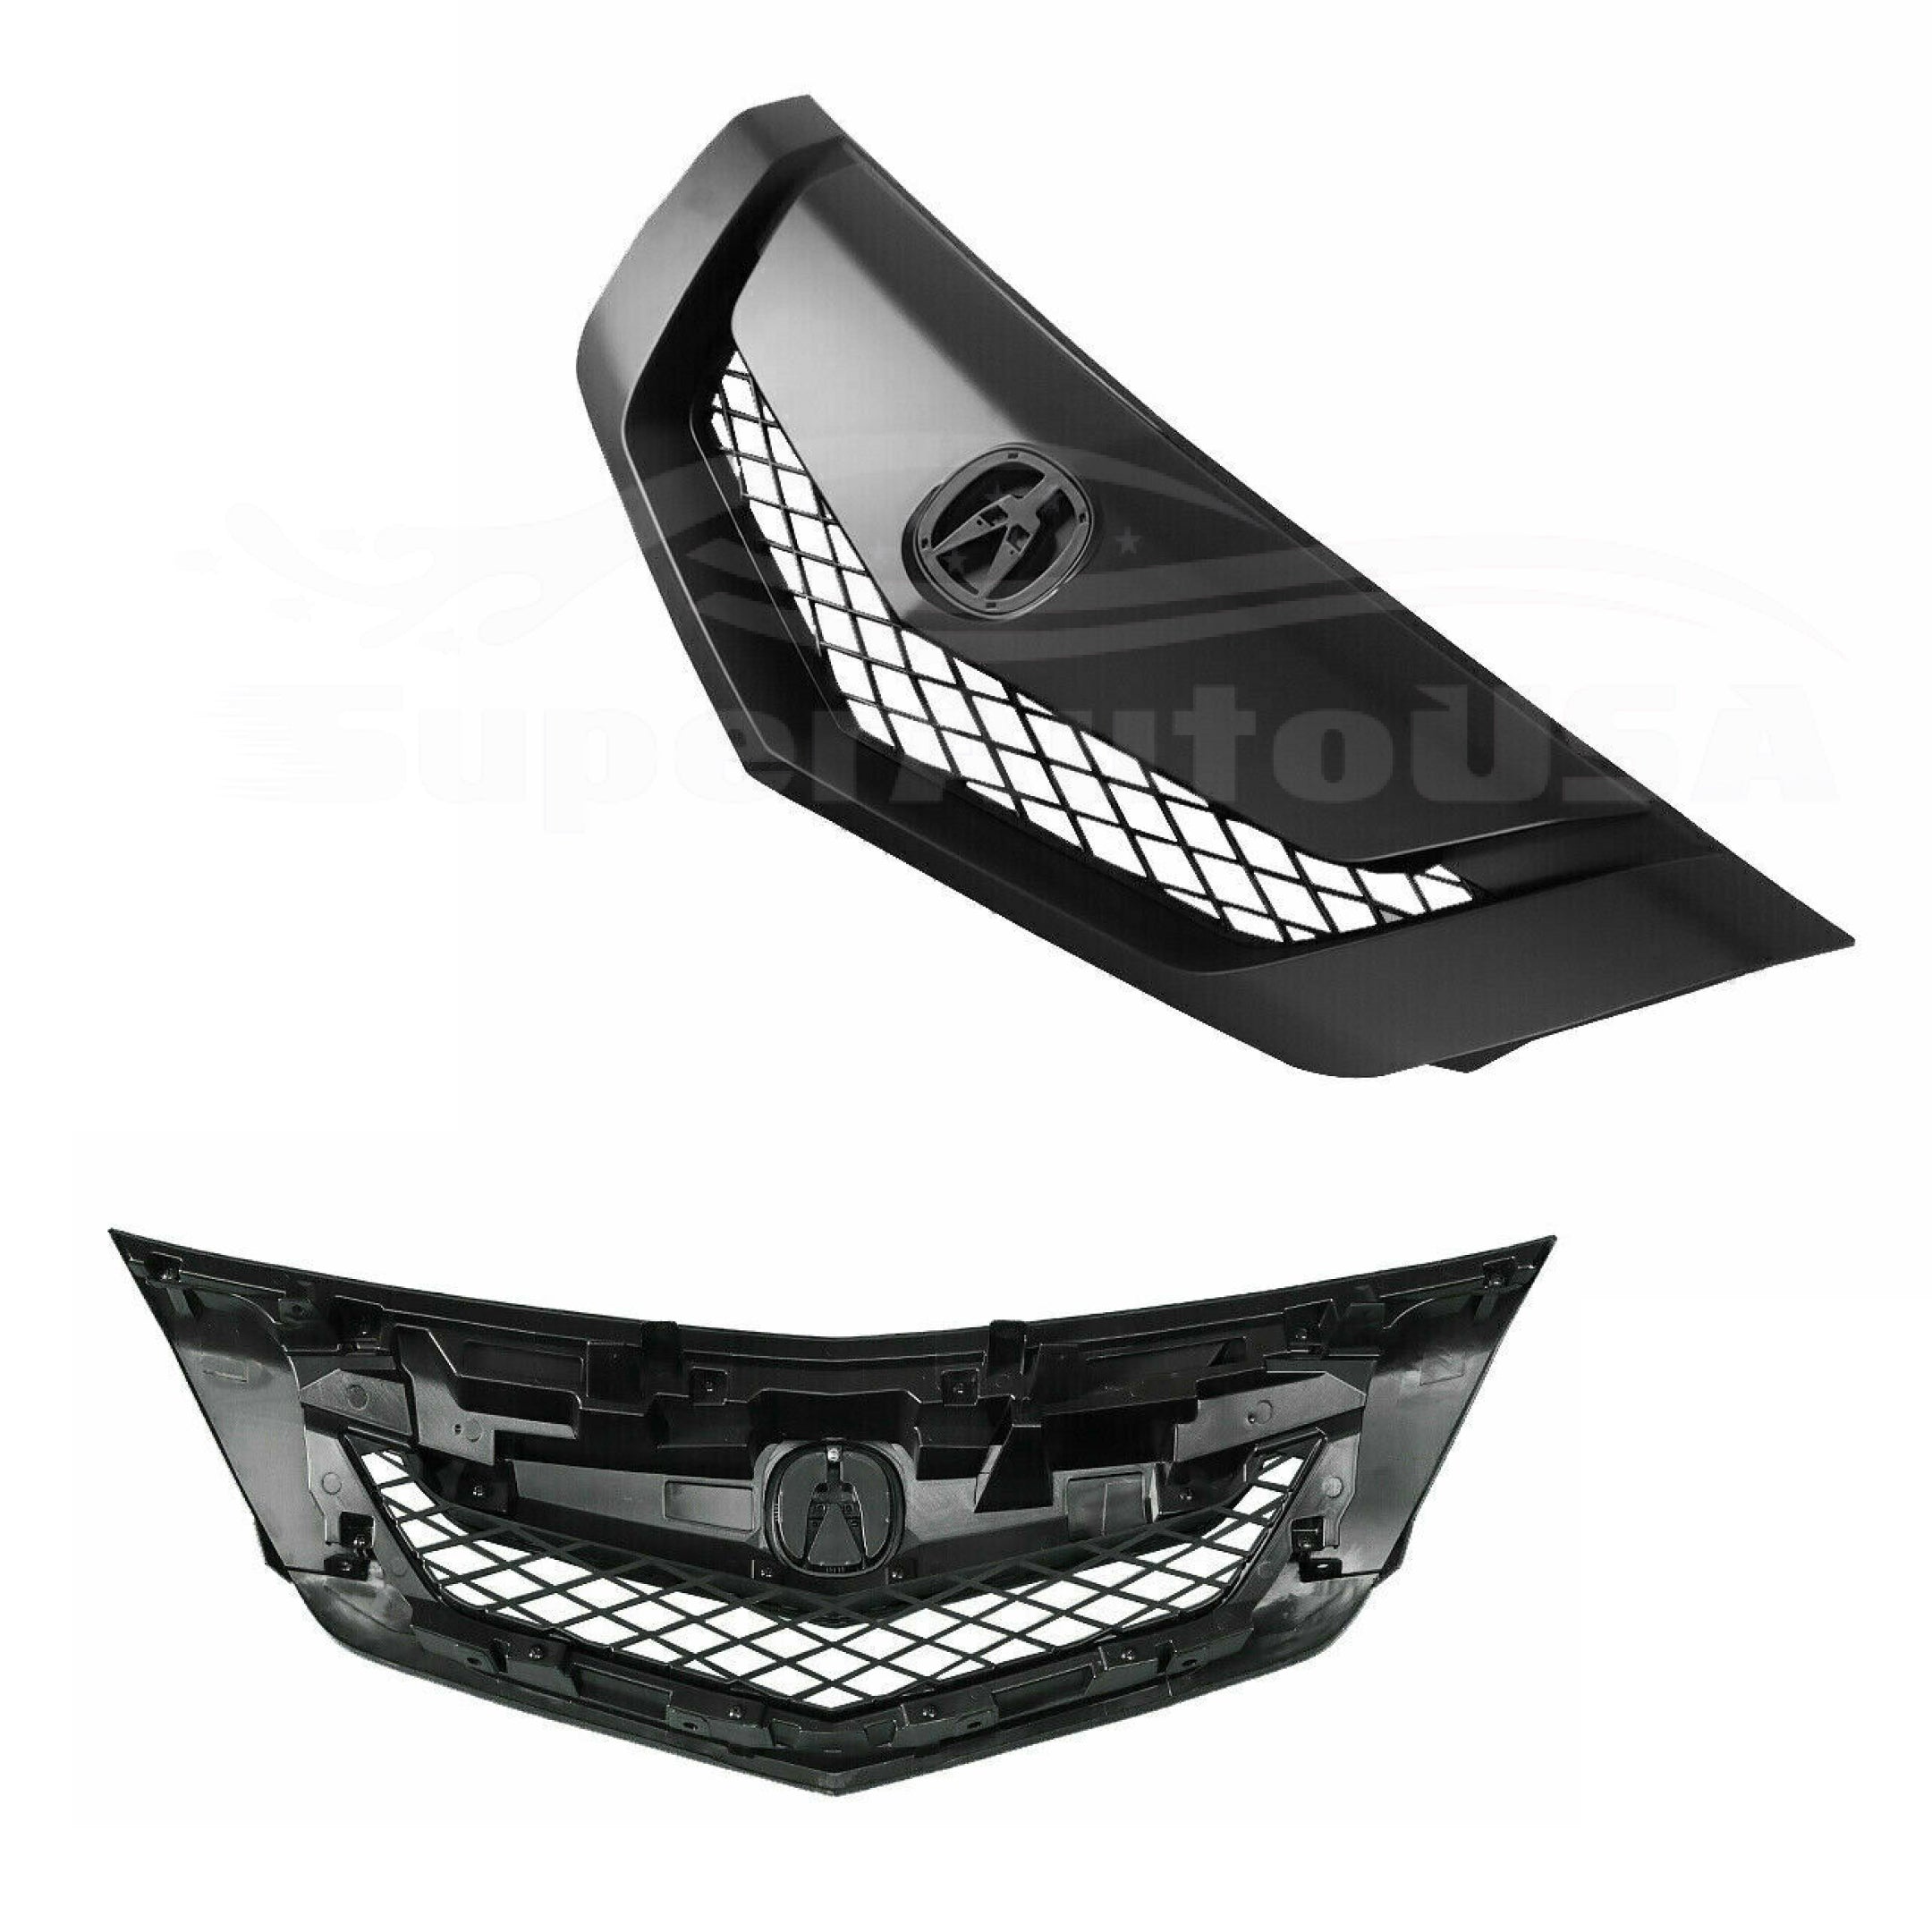 Fit 2009-2011 Acura TL Front Bumper Upper Grille Assembly (Painted Gloss Black)